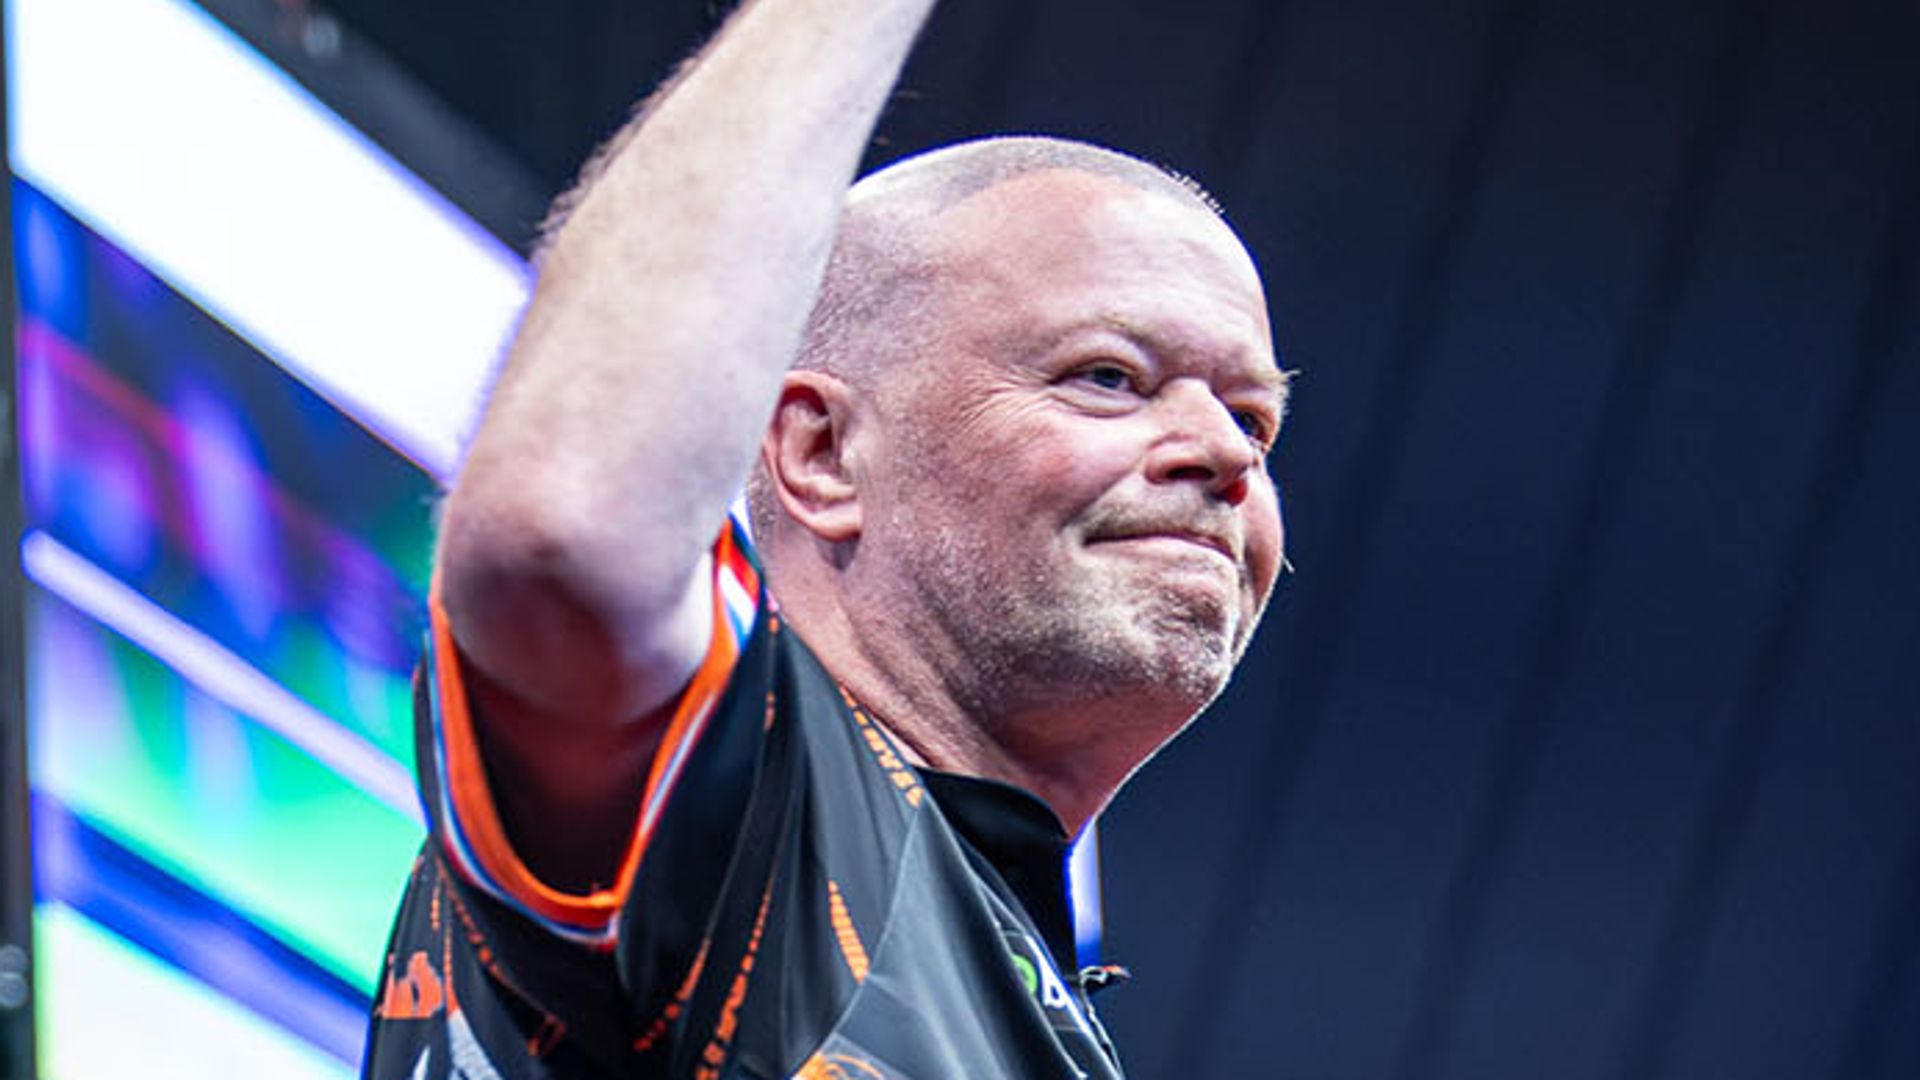 Van Barneveld shocks Humphries as MVG wins and Price dumped out